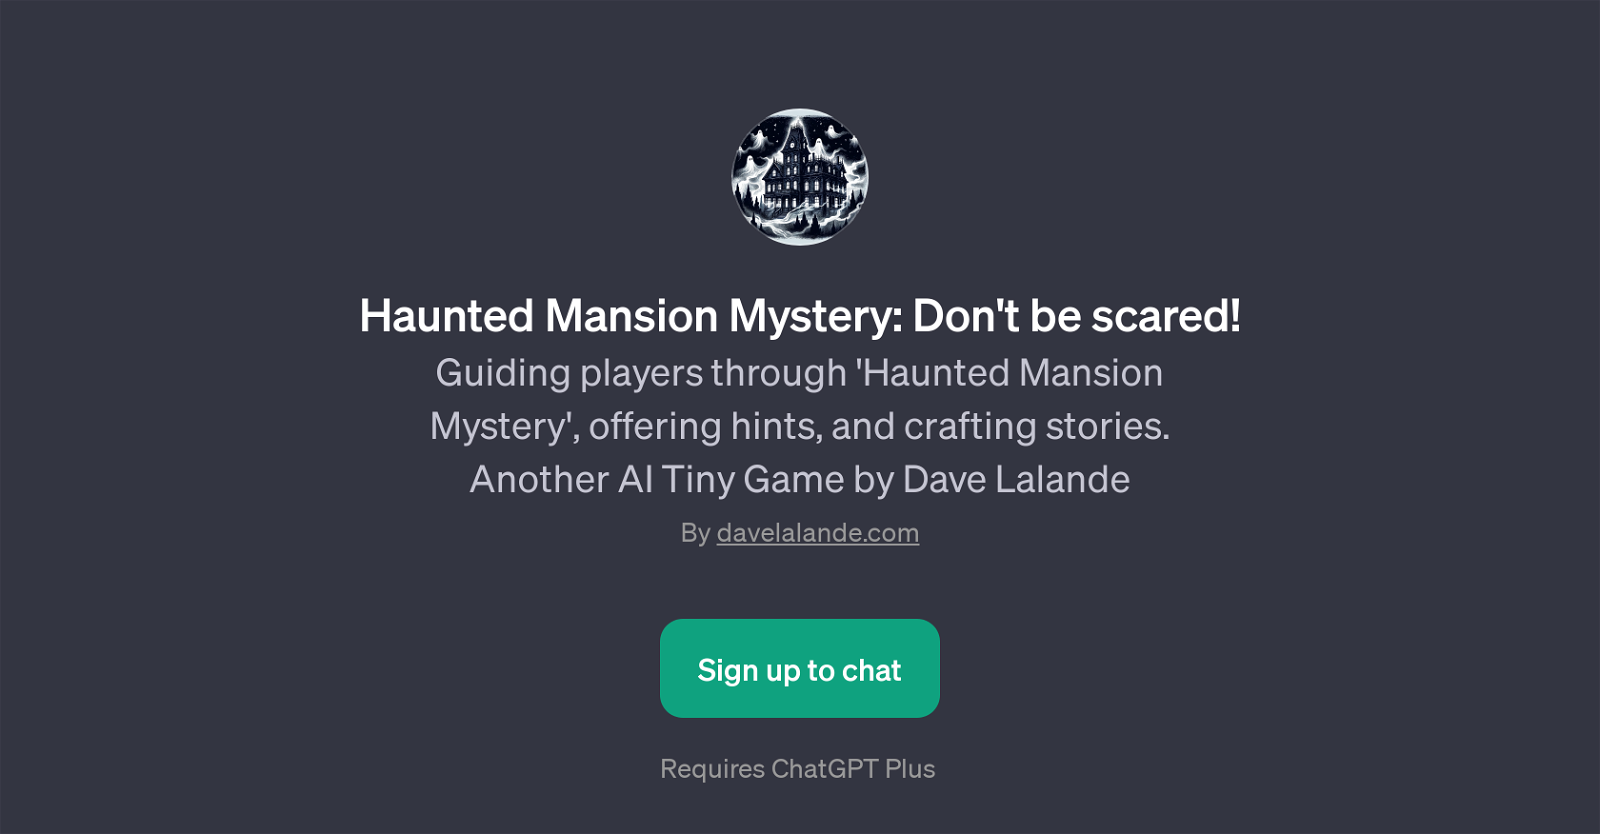 Haunted Mansion Mystery website